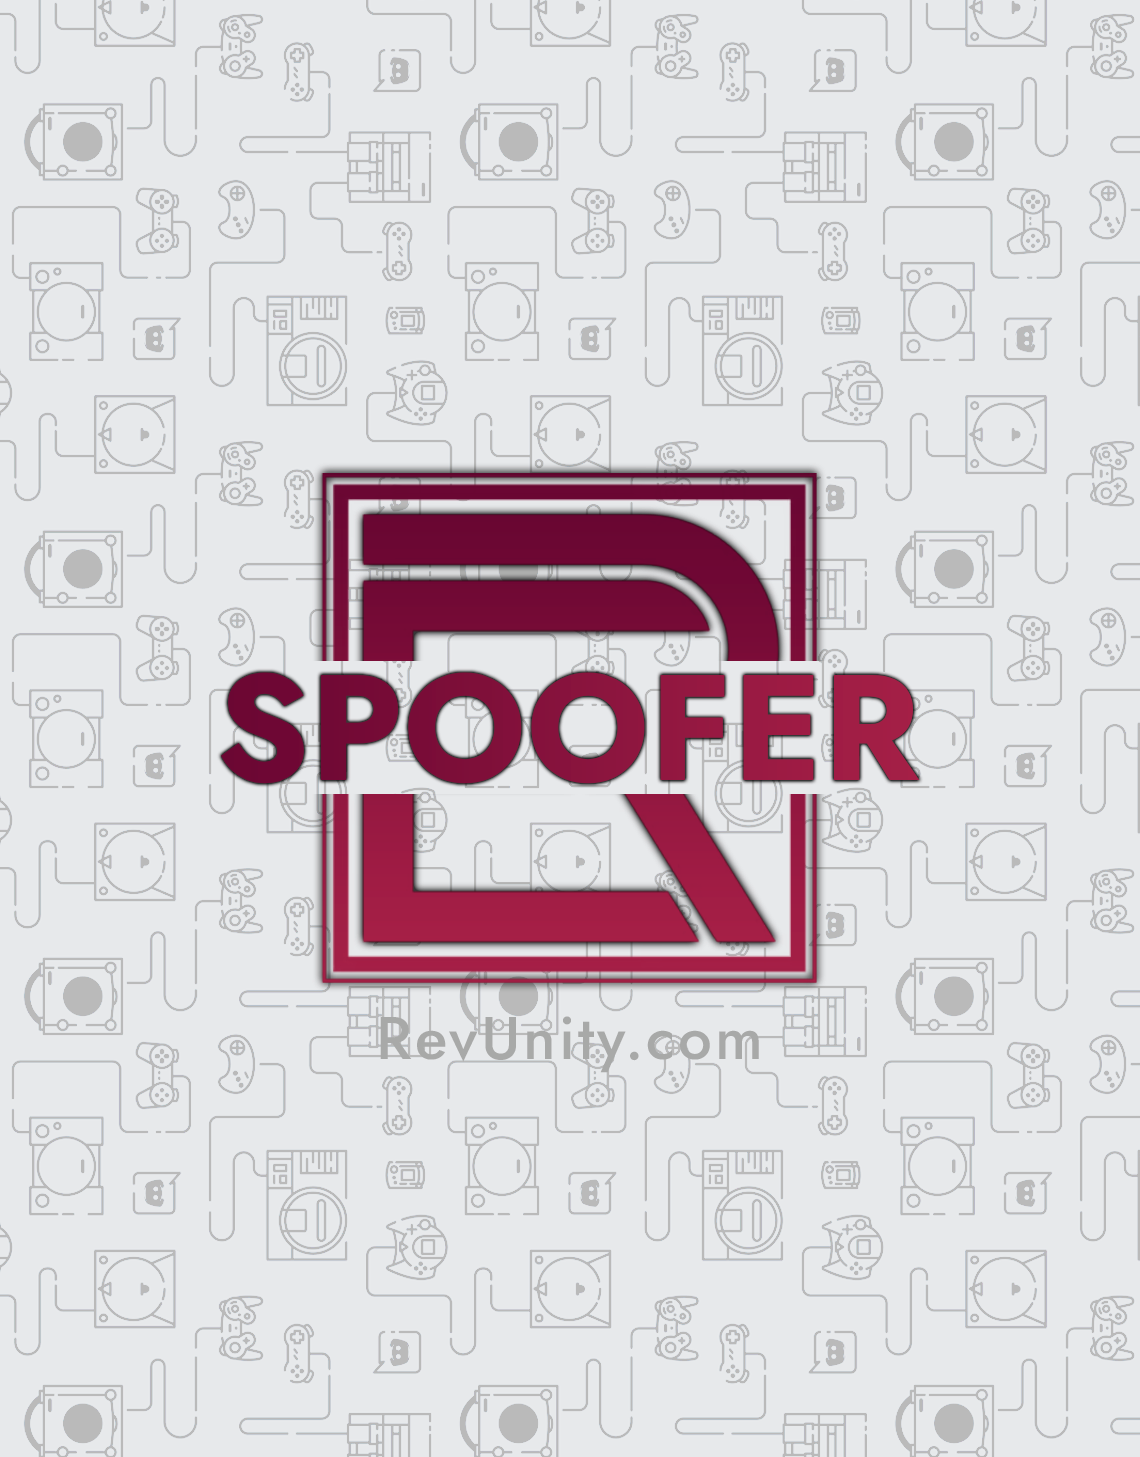 GitHub - SonsoFsERpent/redEngine-Spoofer: With the redENGINE